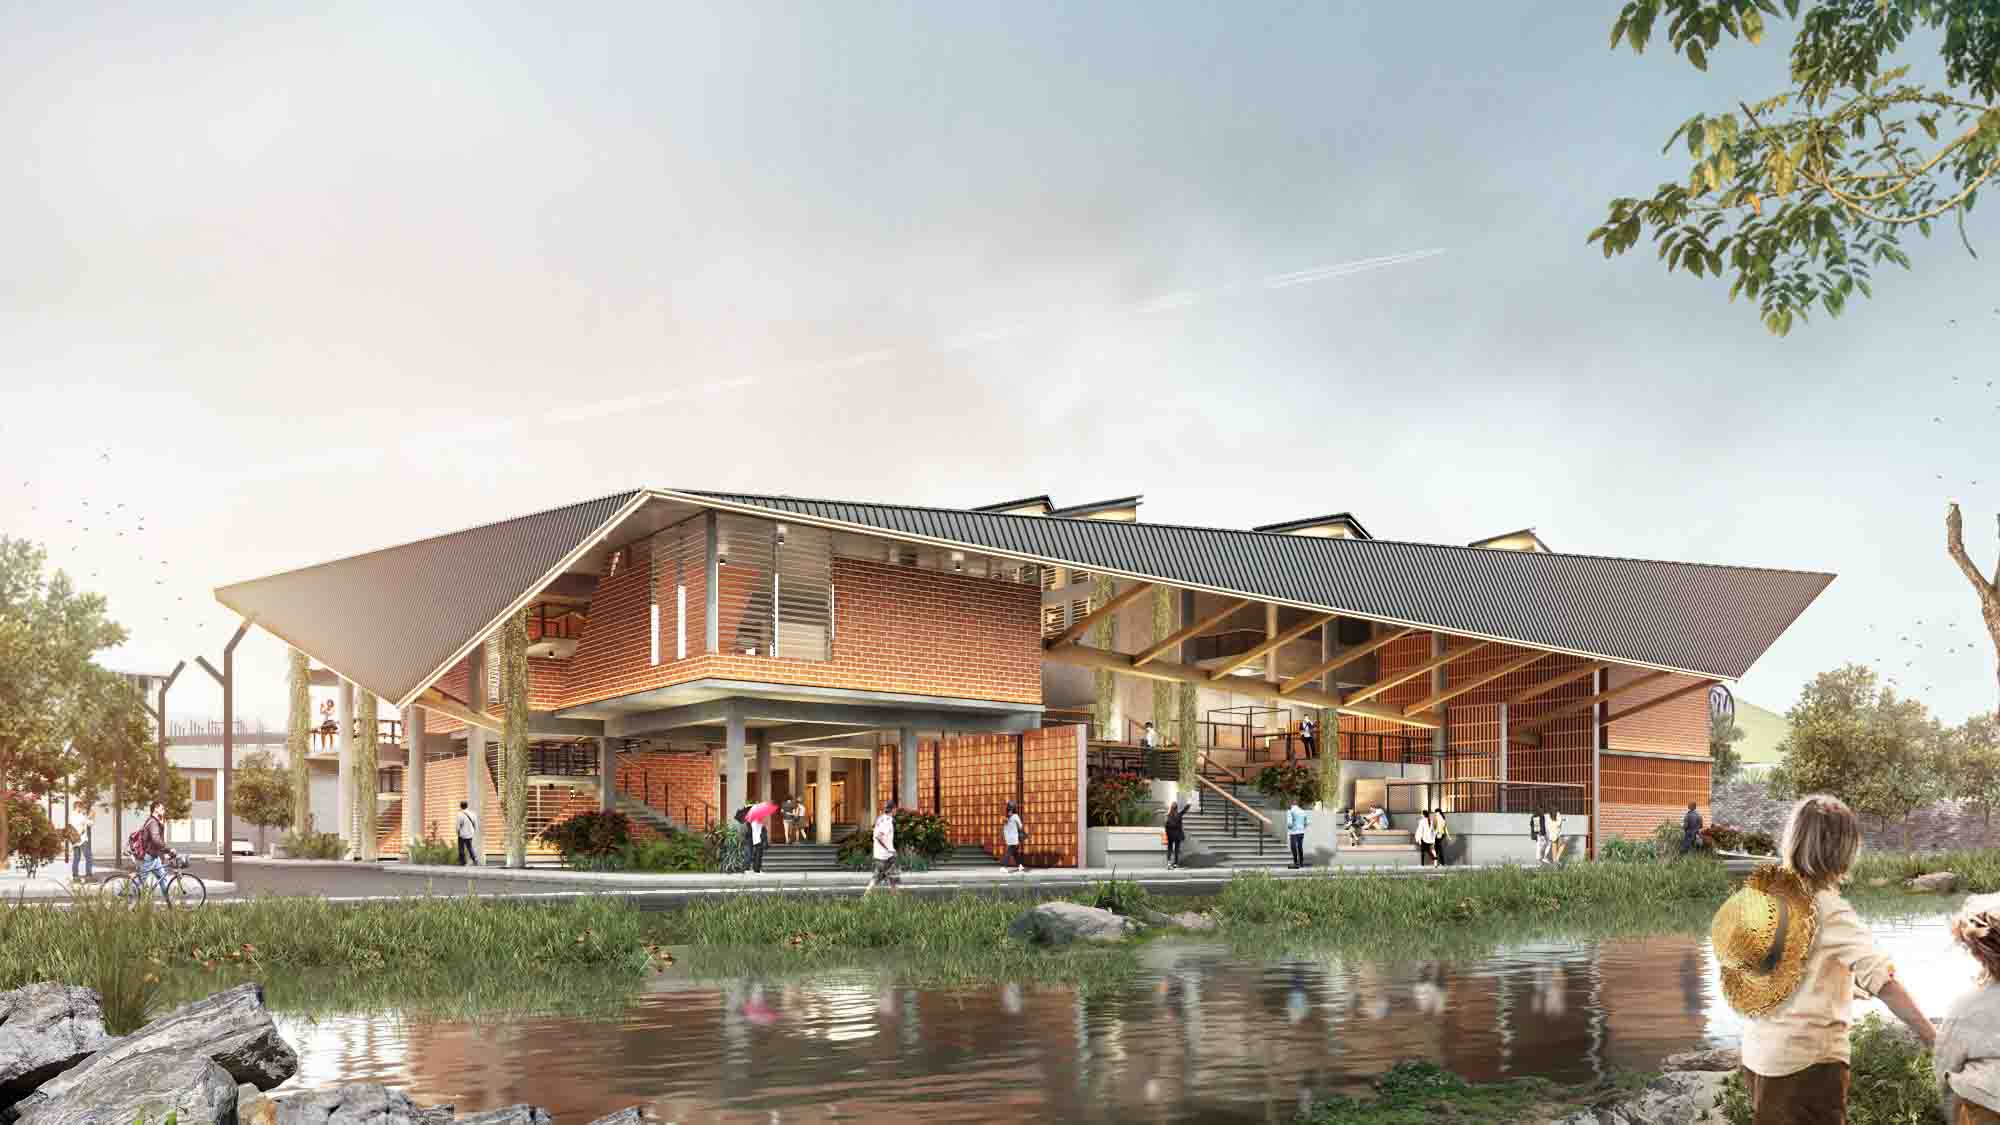 Large community center with slanted roofs overlooking a small lake.